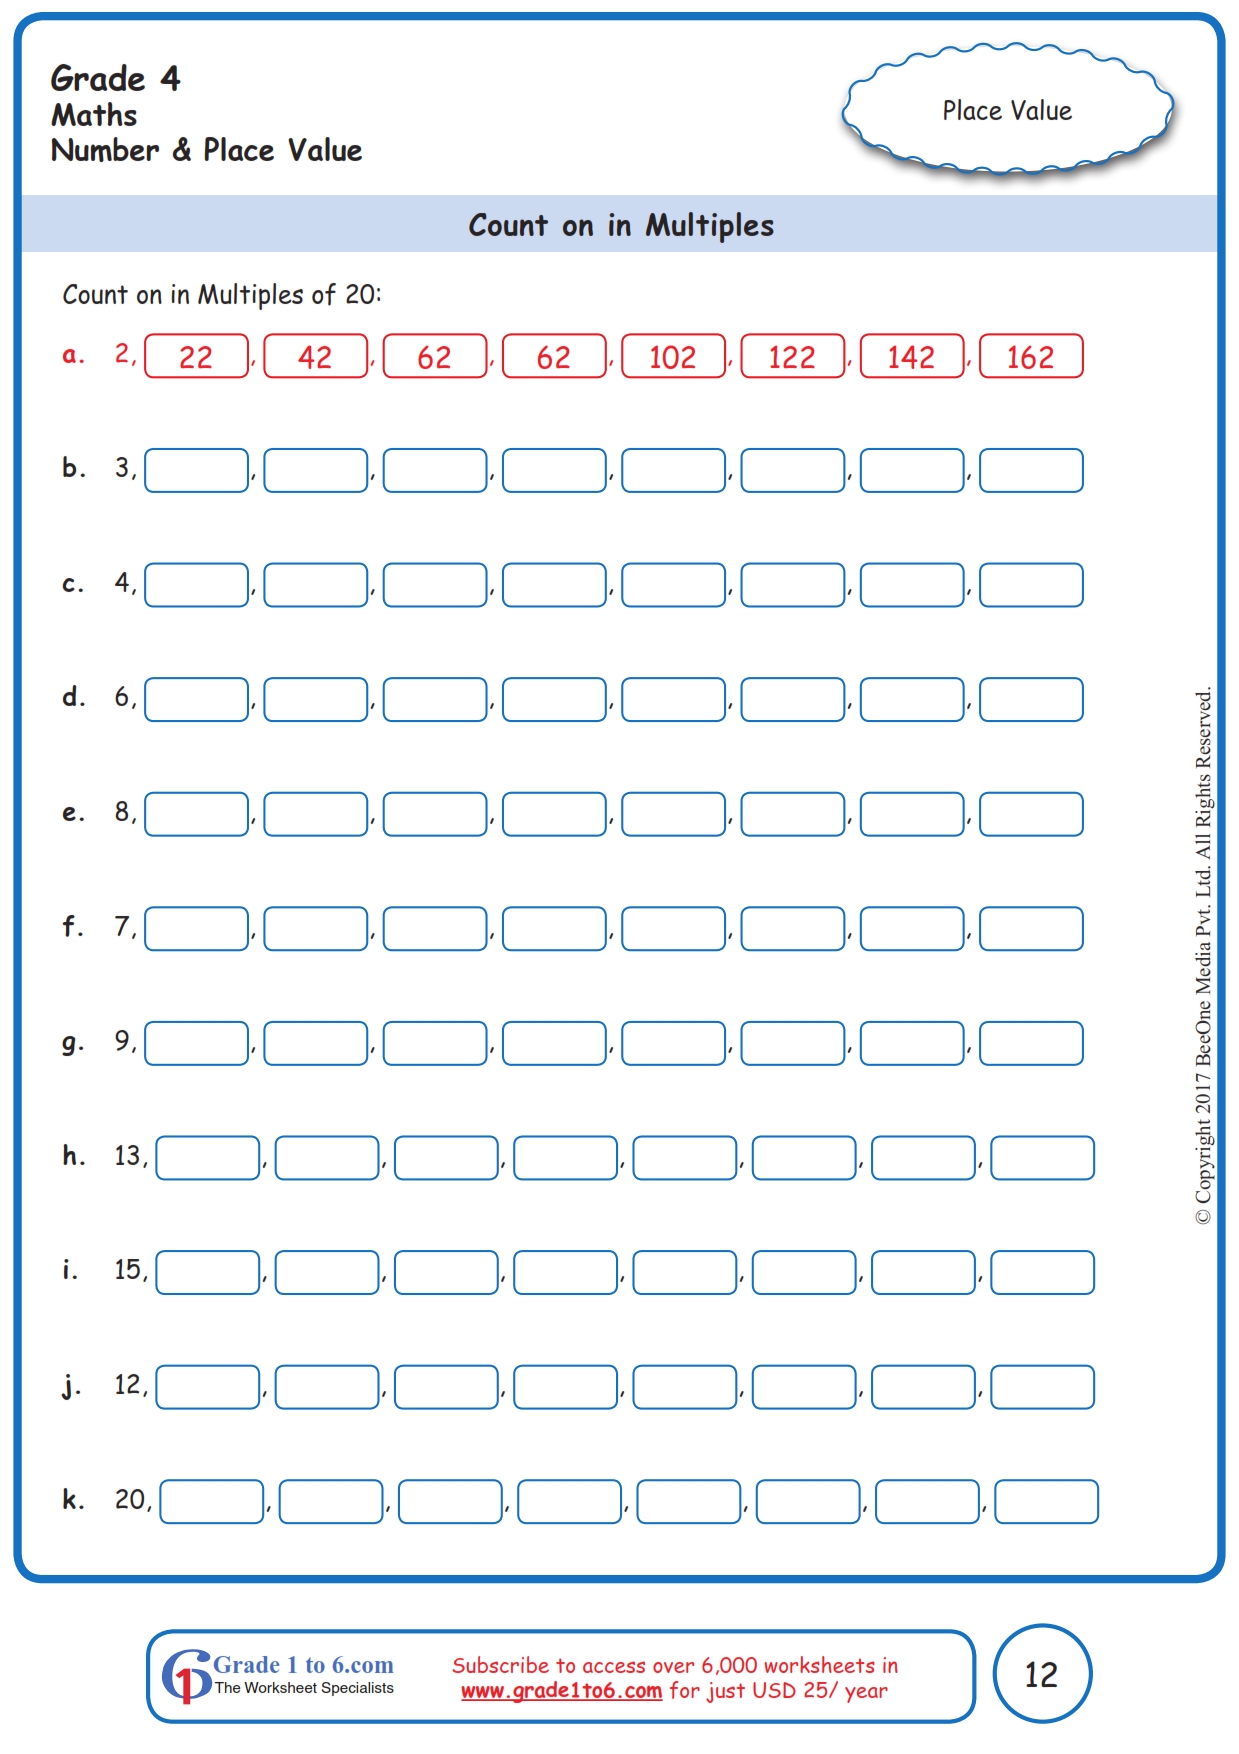 counting-in-multiples-of-10-worksheets-www-grade1to6